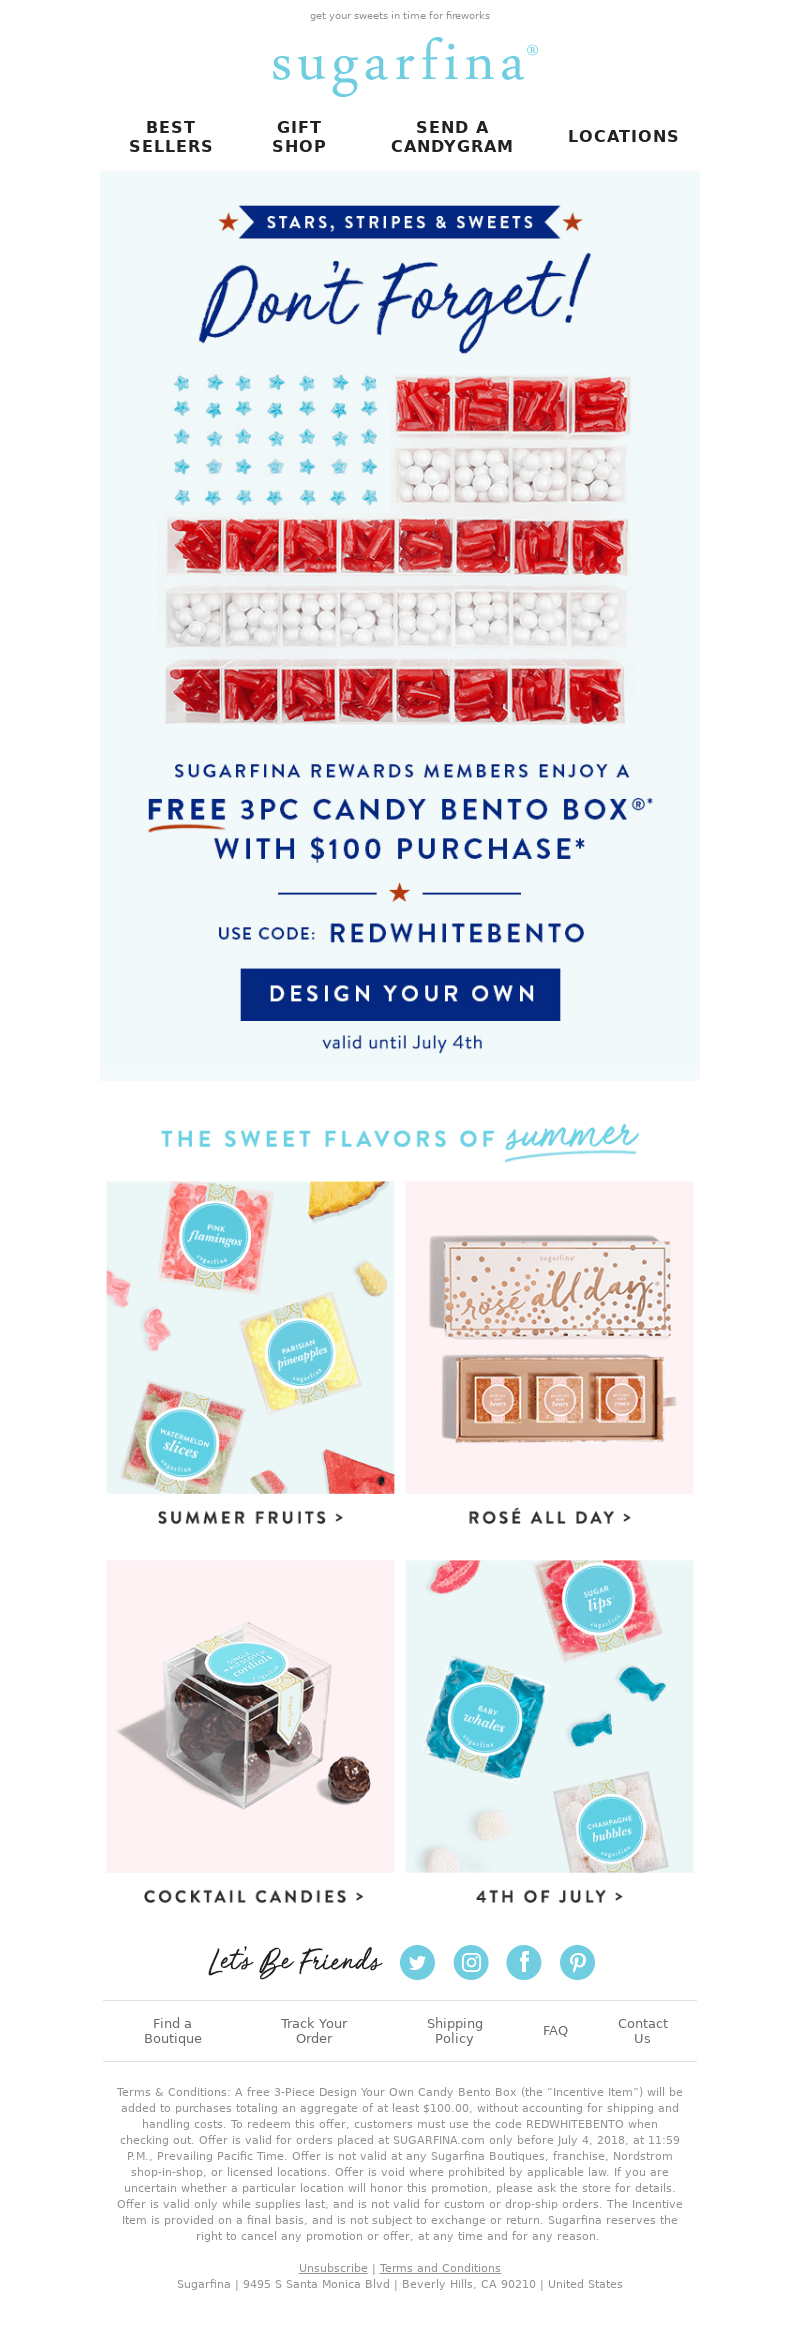 Independence Day email from Sugarfina